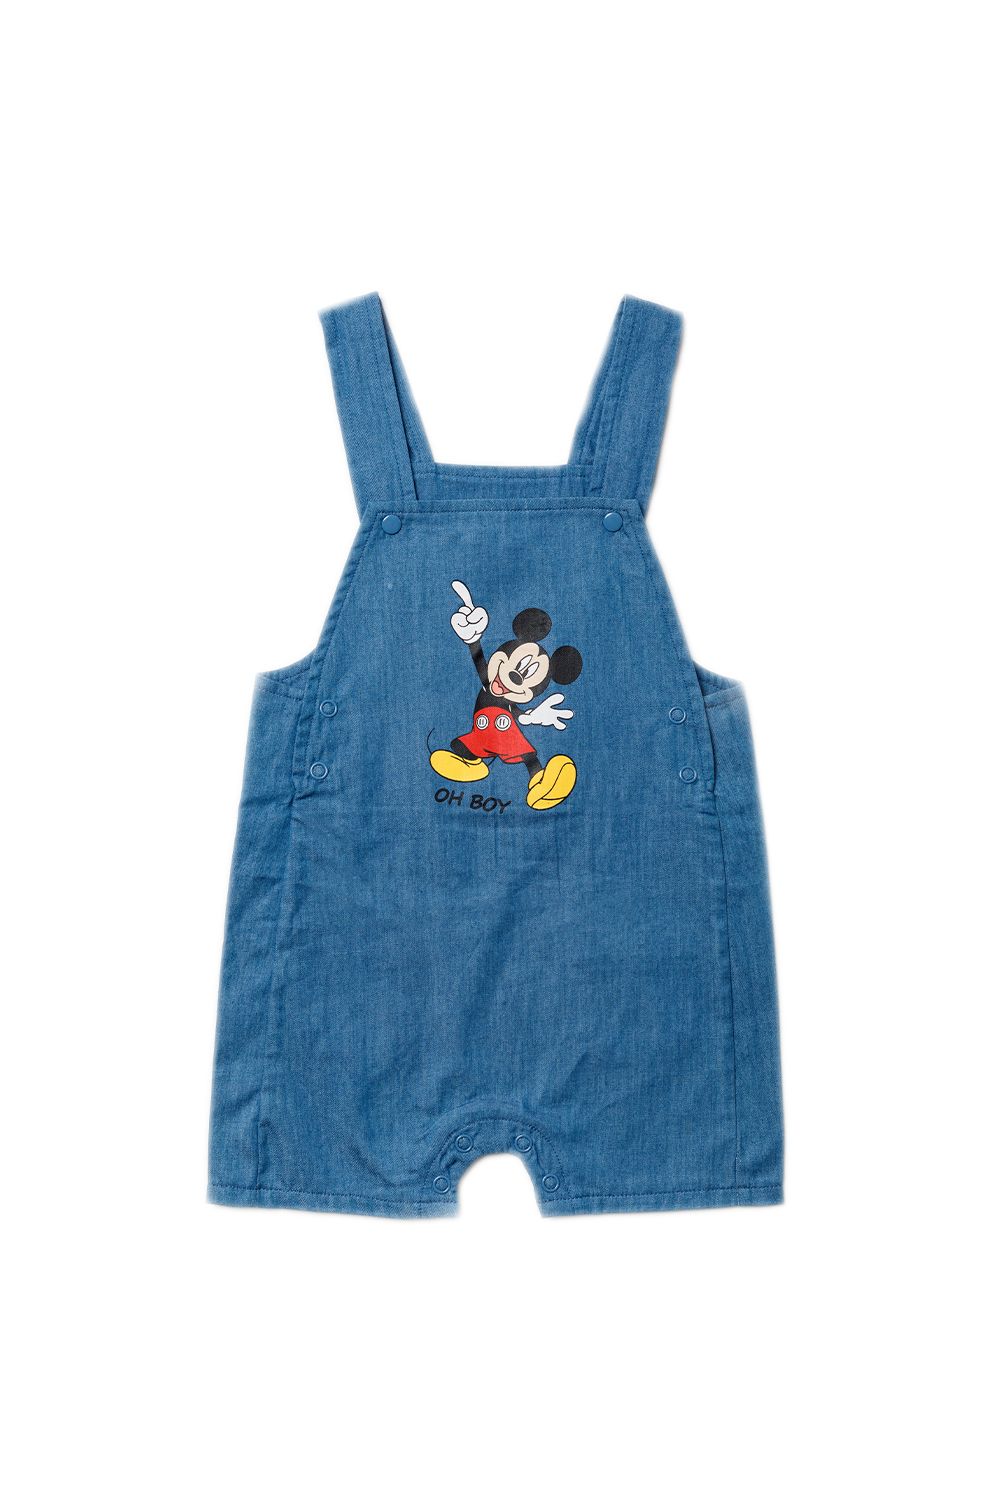 This adorable Disney Baby two-piece set features a classic Mickey Mouse print. The set includes a srtipey t-shirt and chambray style dungarees. Both the t-shirt and dungarees are cotton, keeping your little one comfortable. This set would make a lovely gift, or a new addition to your little ones wardrobe!